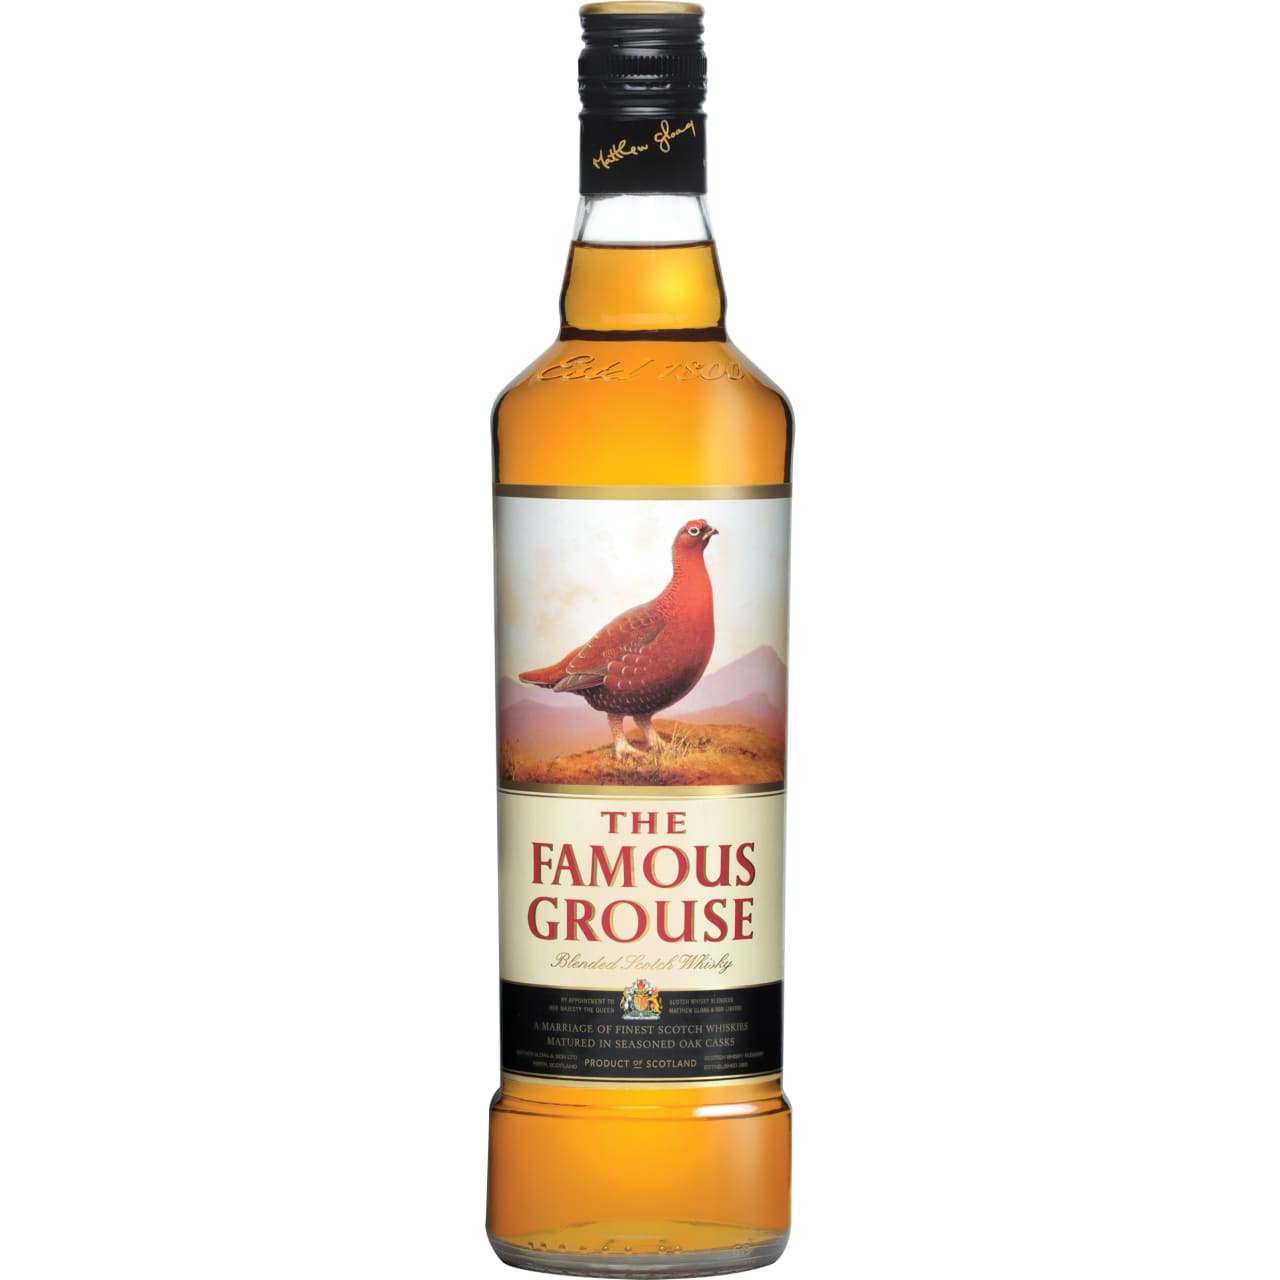 The original blend of The Famous Grouse is perfectly balanced with notes of orange citrus, sherry and oaky tones.